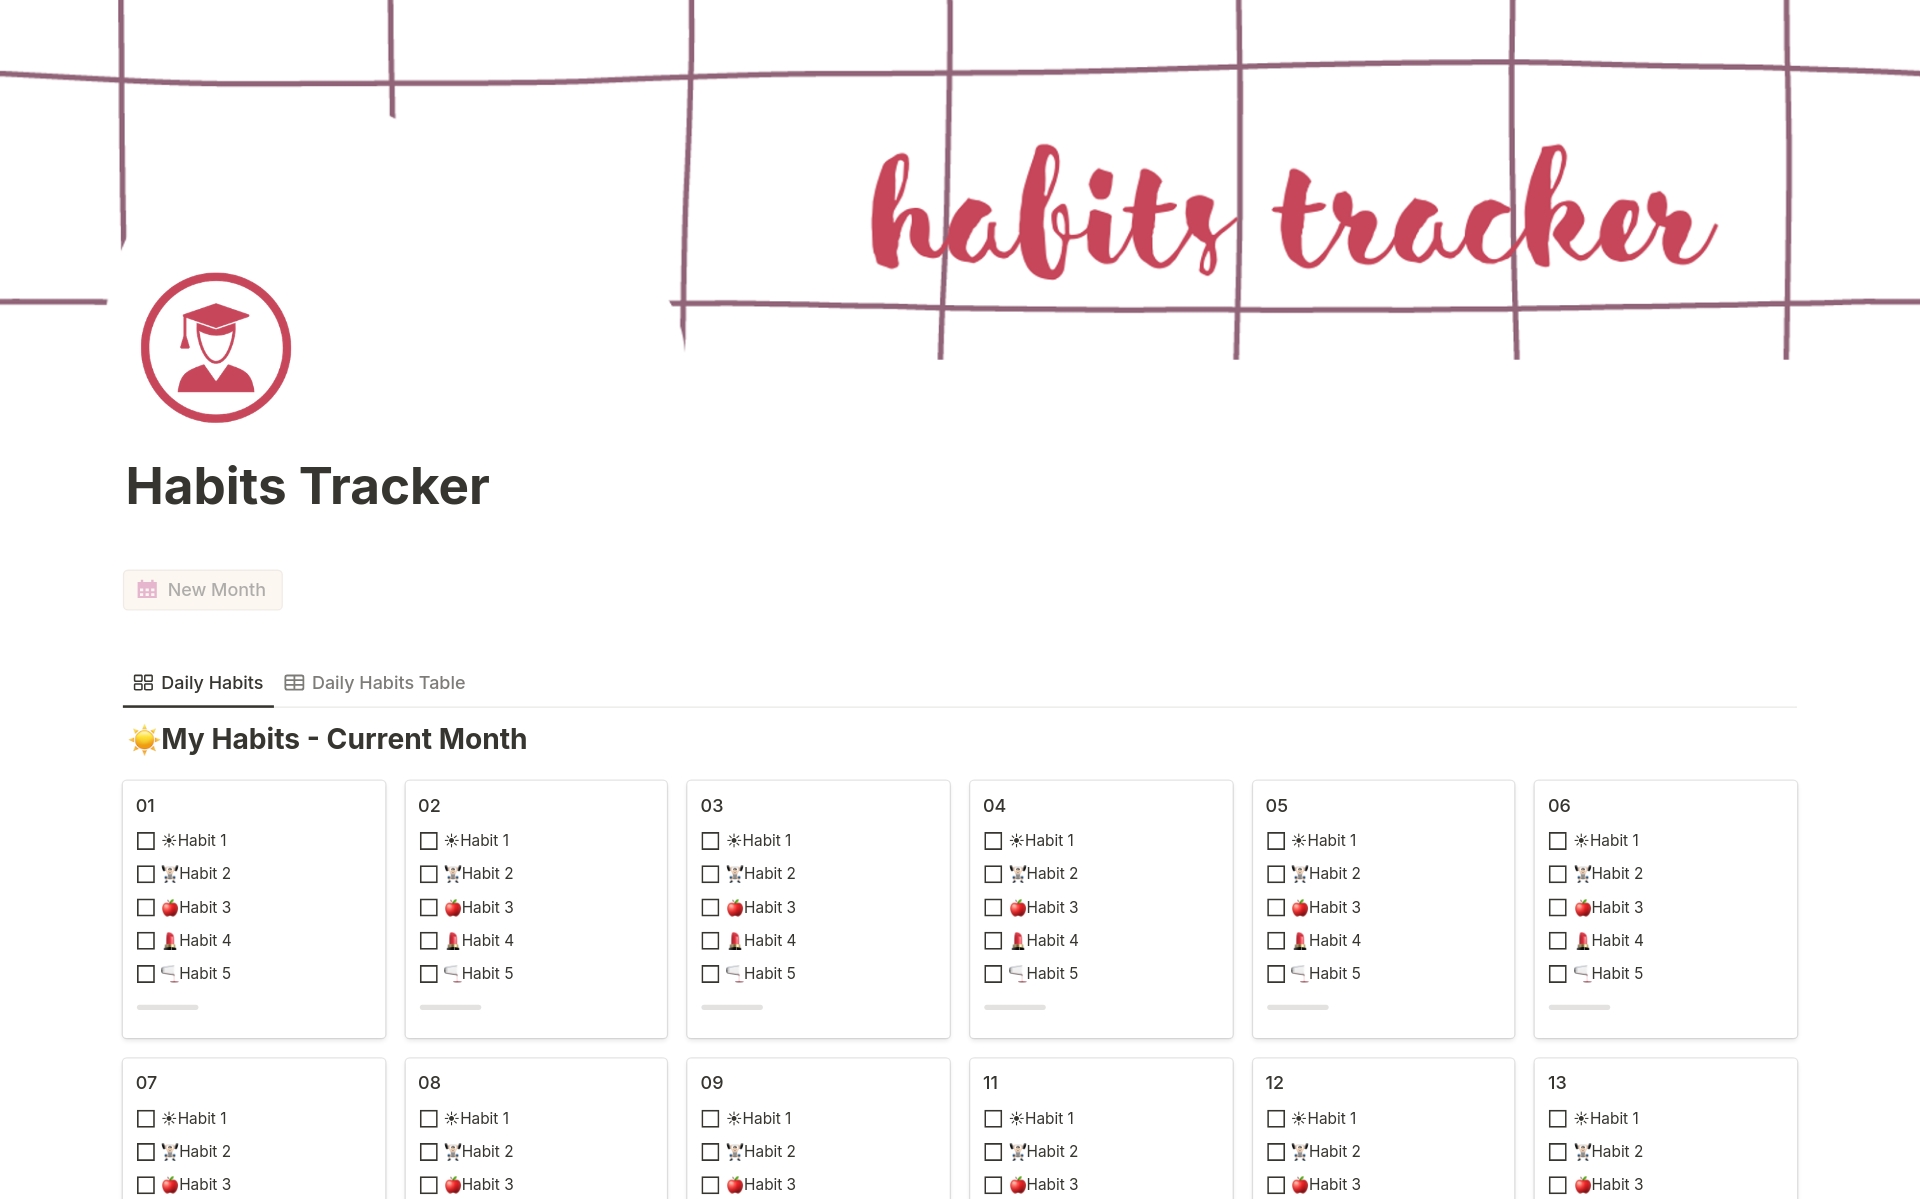 You've heard it everywhere: you need 'good' habits! But it's not that easy to put them in place. To help you, I've created this little tracker